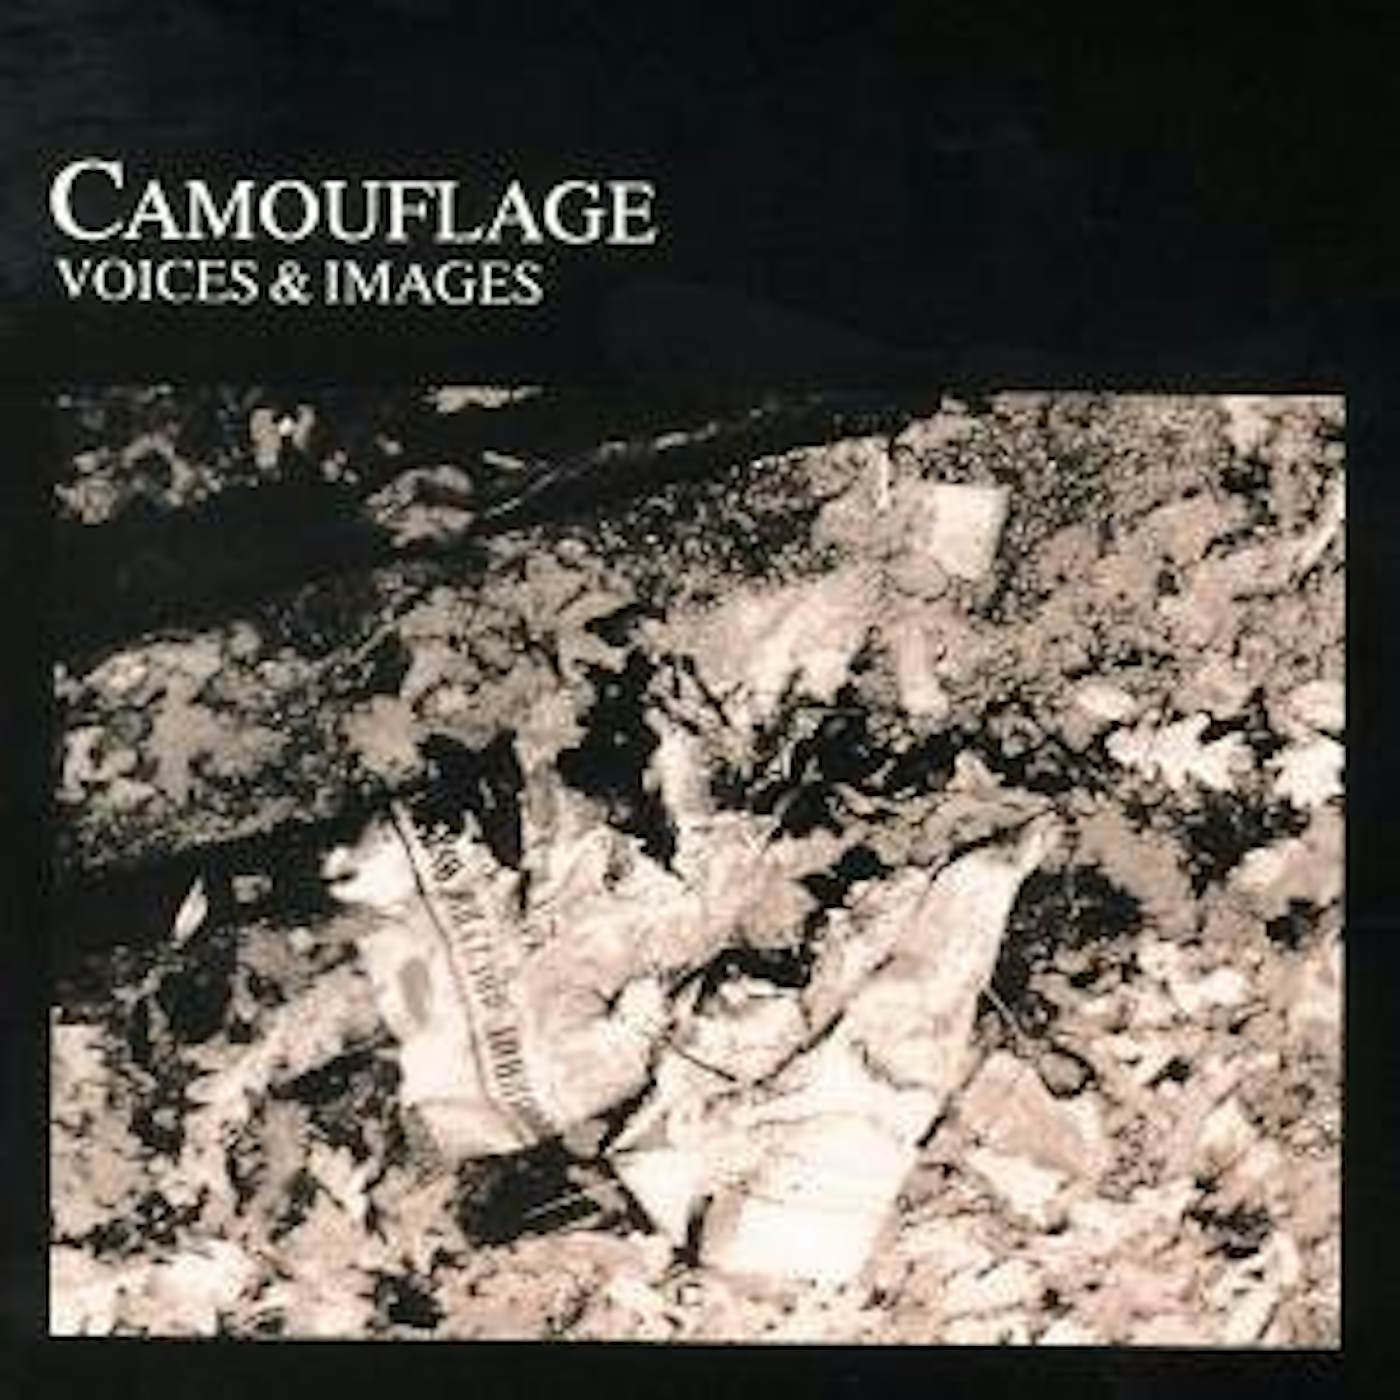 Camouflage VOICES & IMAGES CD